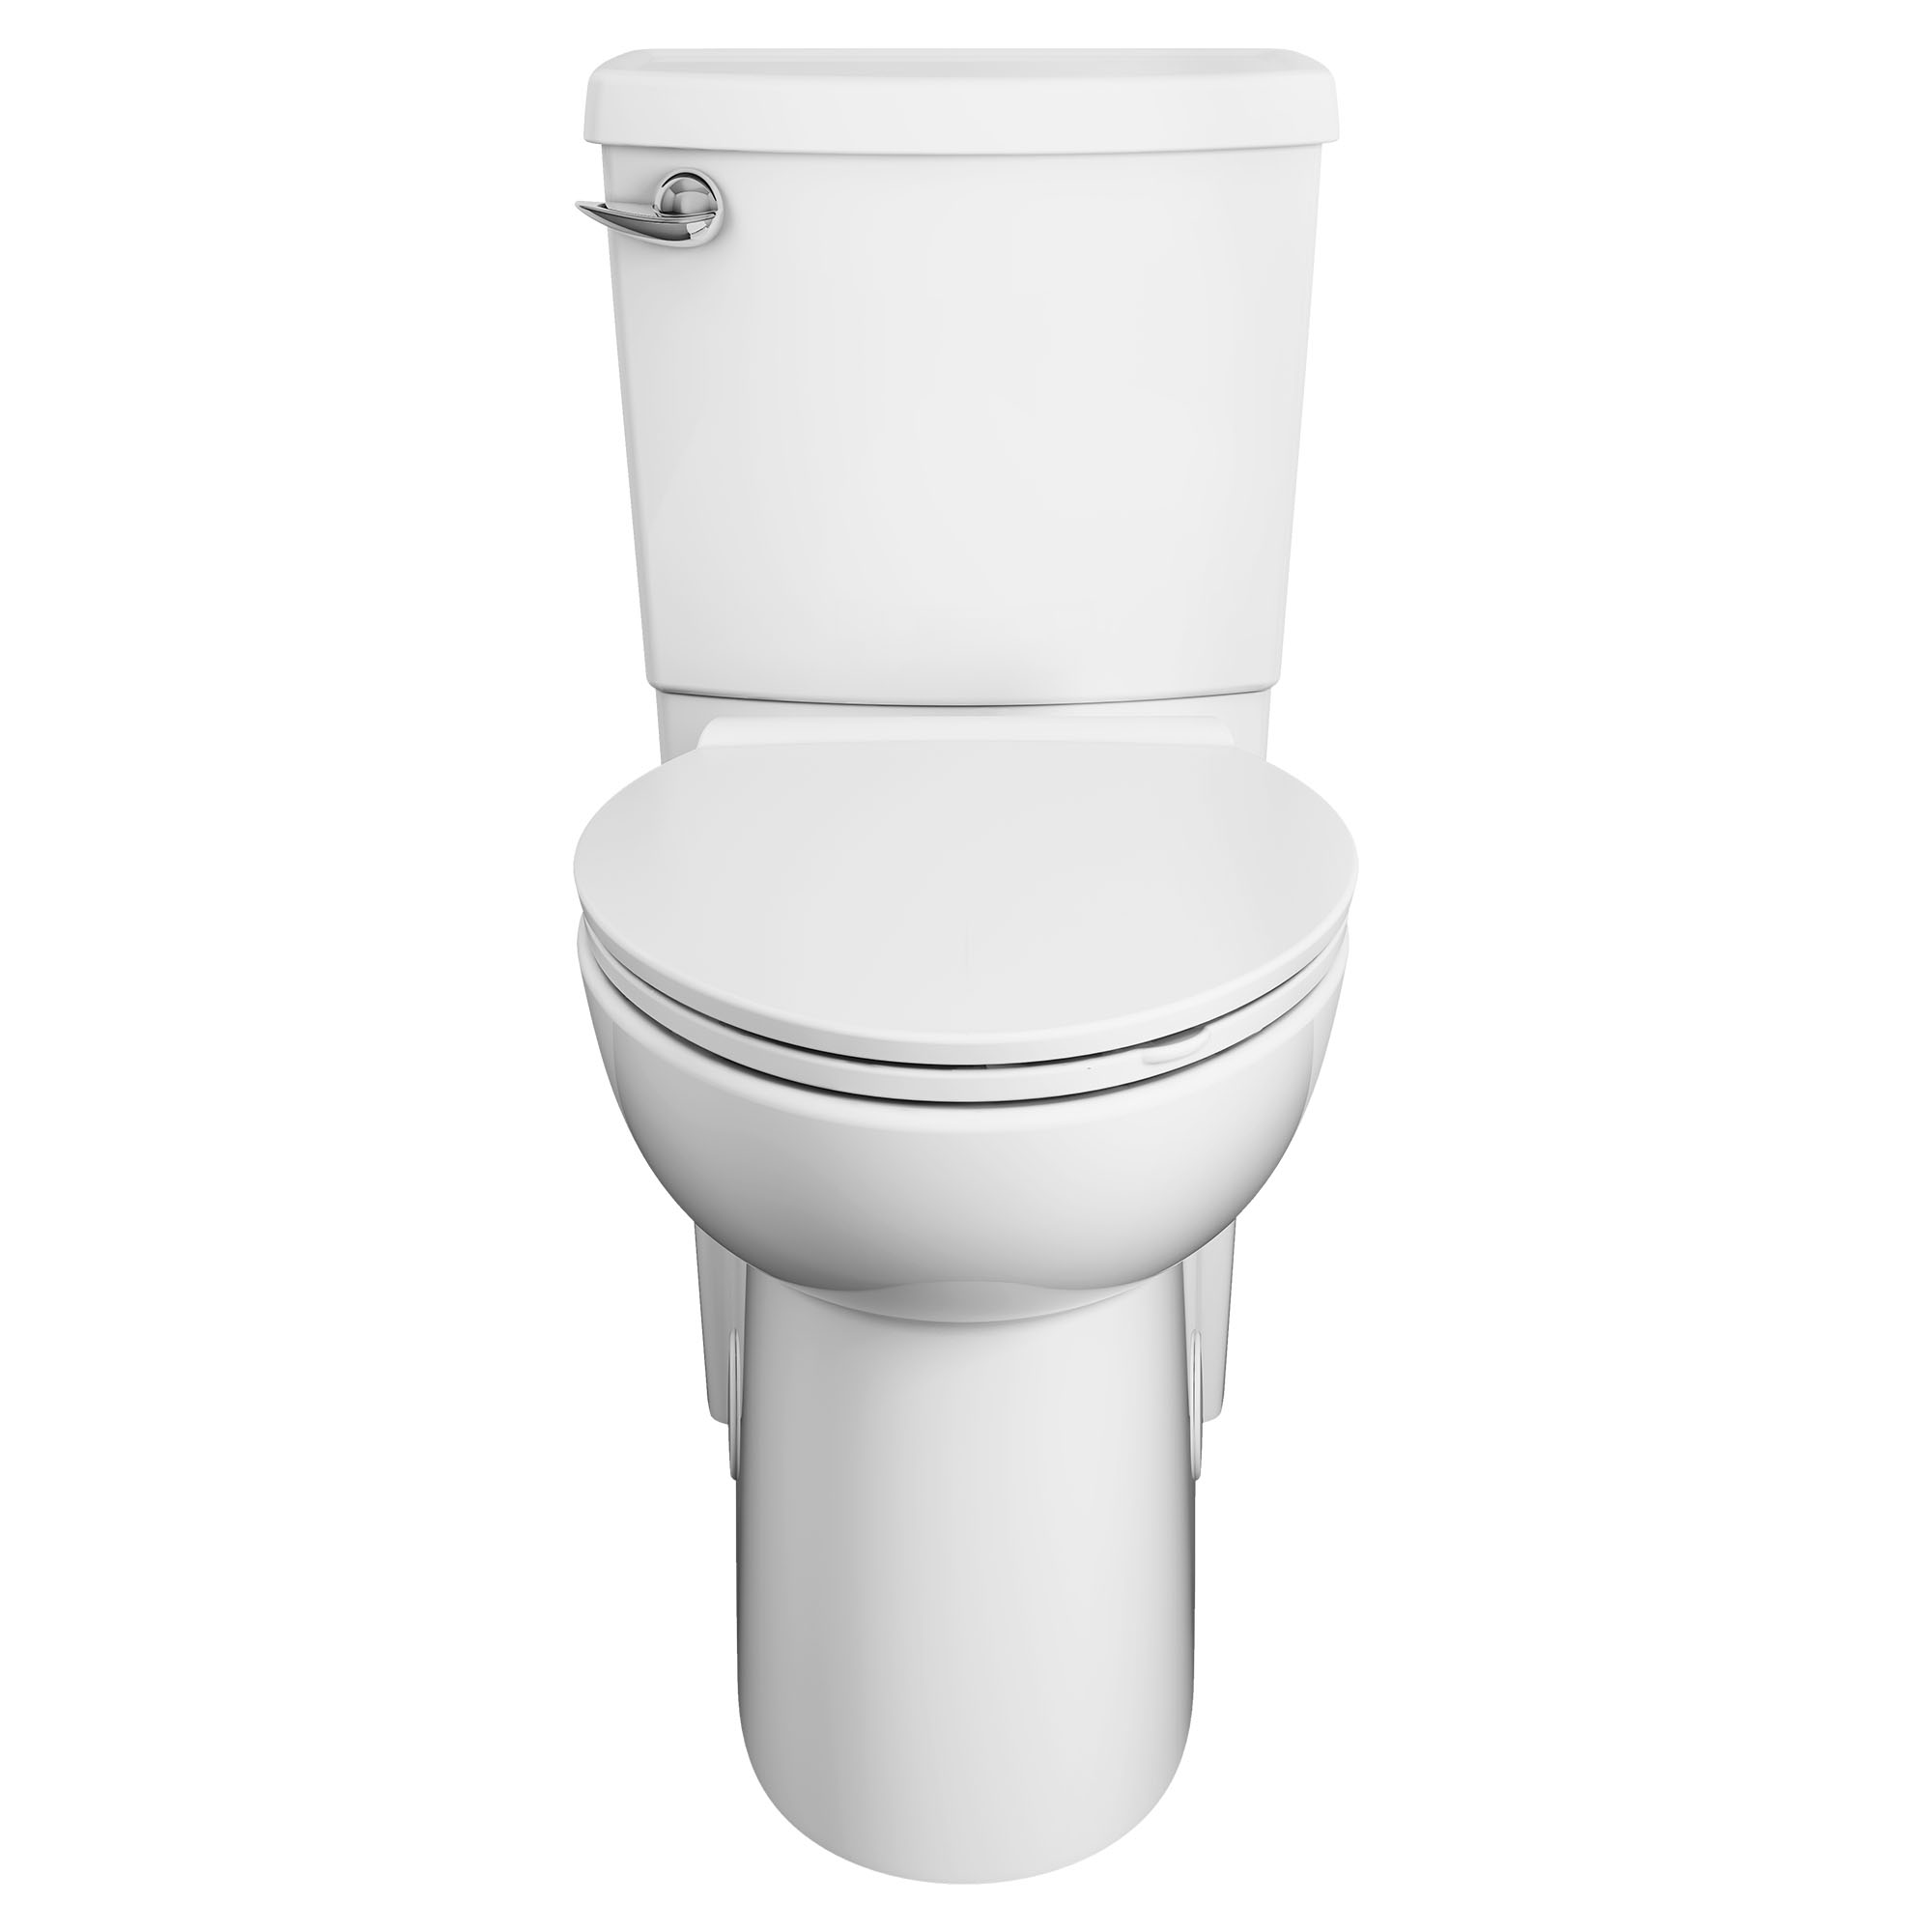 Cadet®3 FloWise™ Skirted Two-Piece 1.28 gpf/4.8 Lpf Chair Height Elongated Toilet With Seat